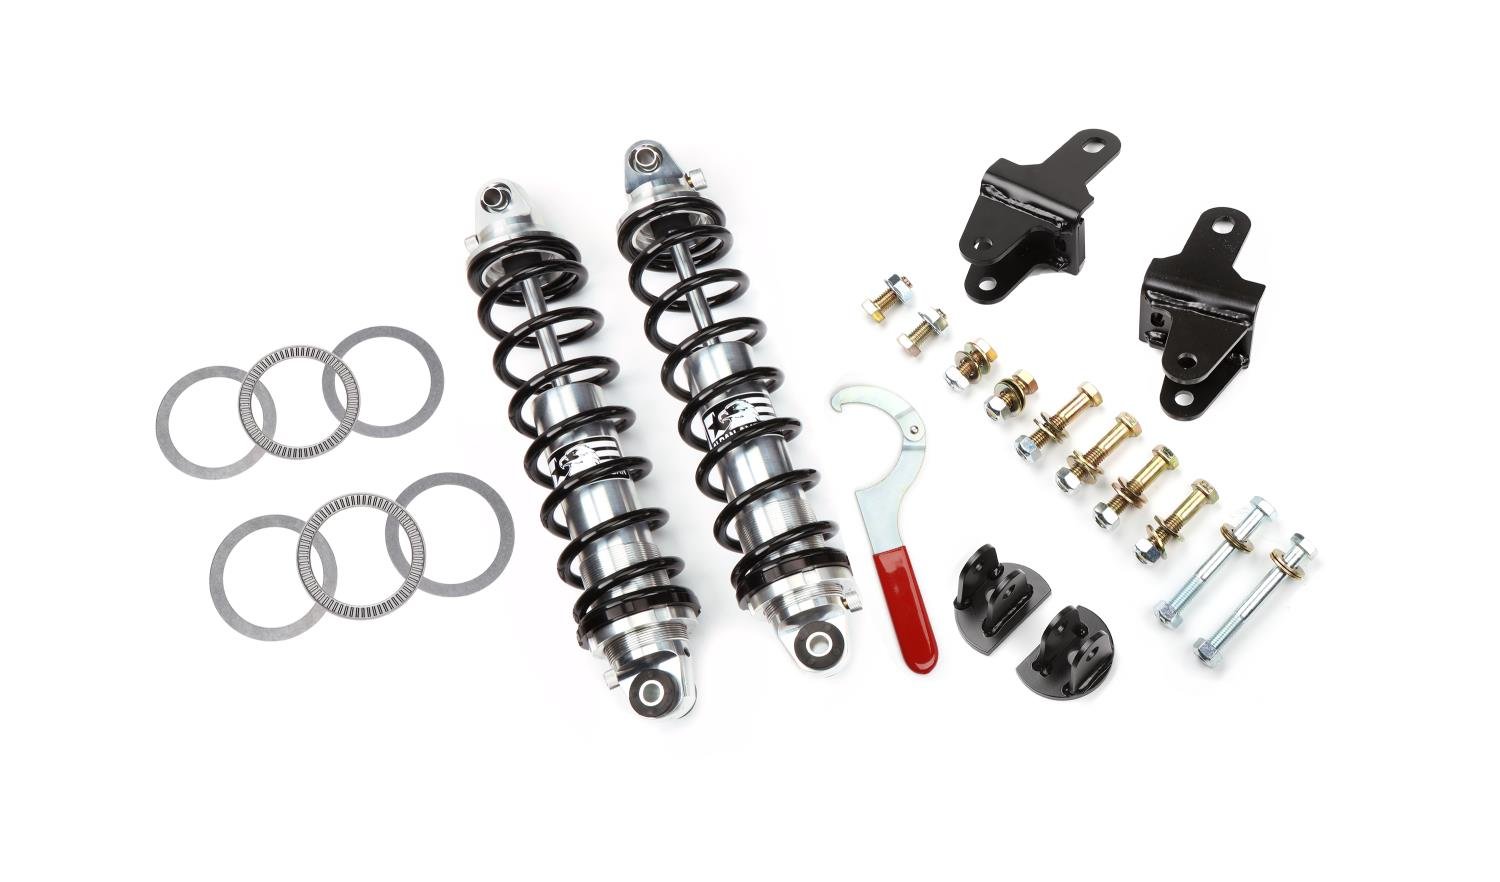 Rear Coil-Over Kit 1979-2004 Ford Mustang, Double-Adjustable [140 lbs./in. Springs]